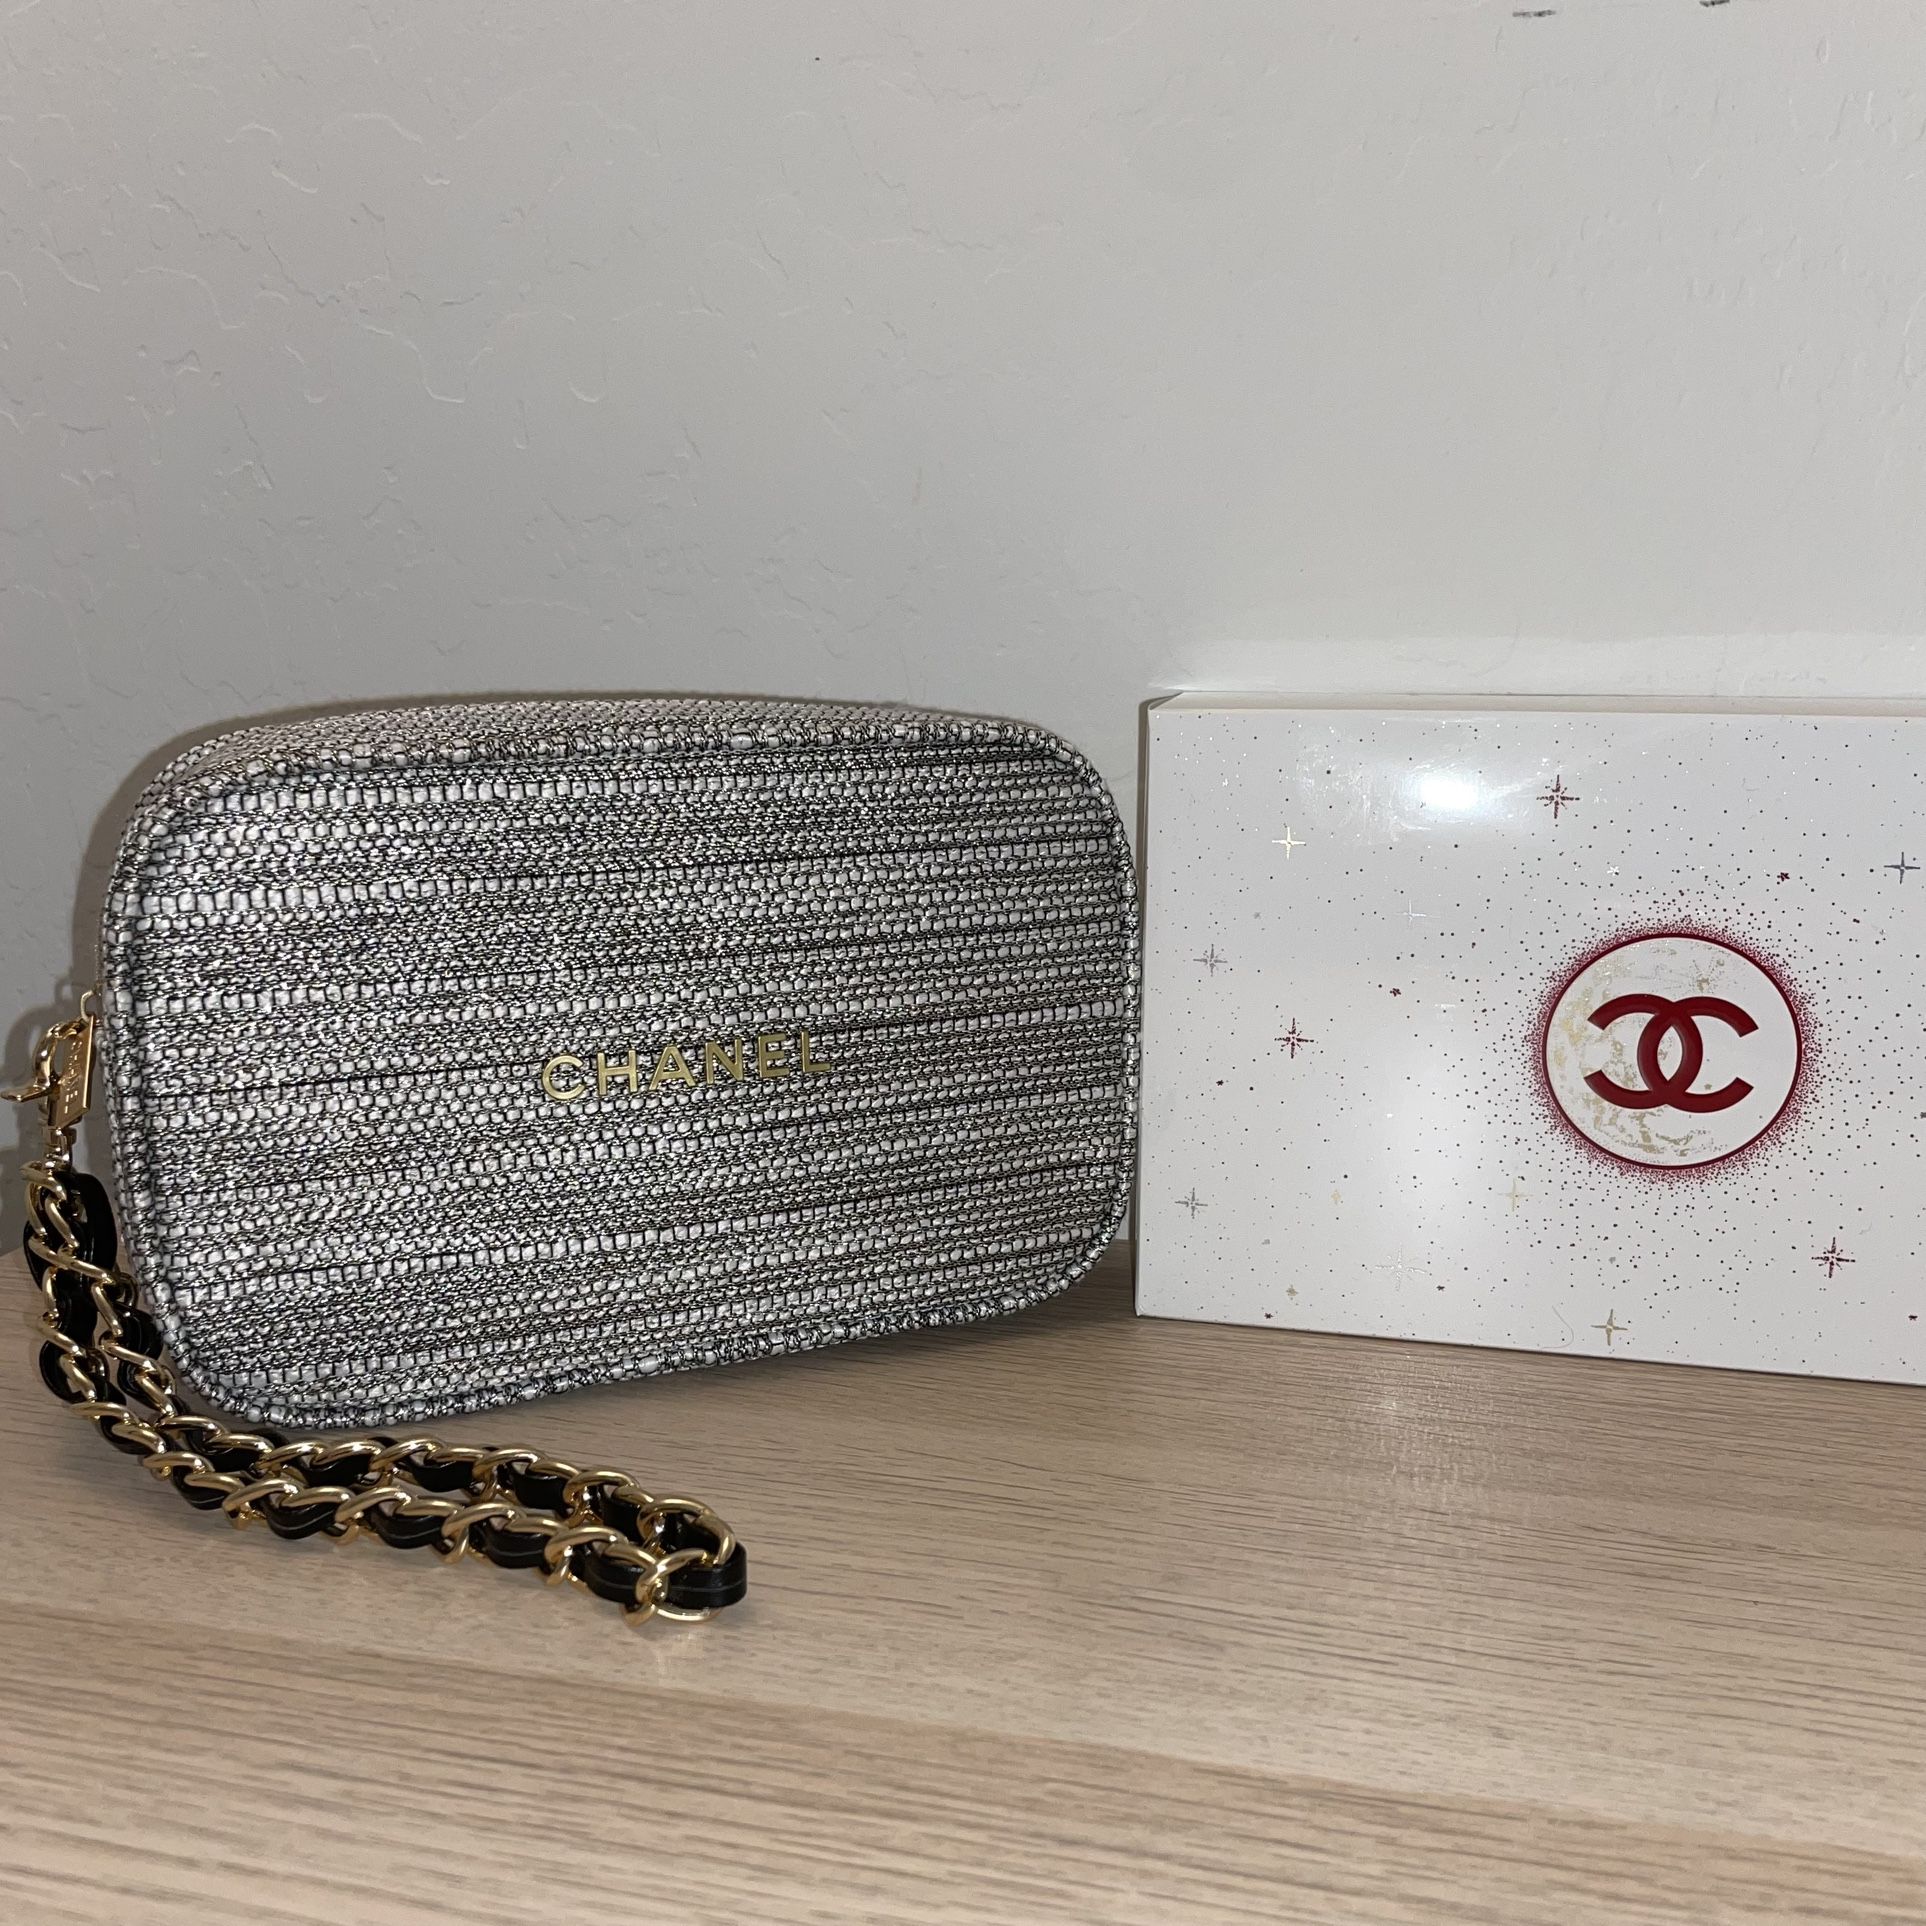 Chanel Makeup Bag With Wristlet Strap for Sale in Henderson, NV - OfferUp